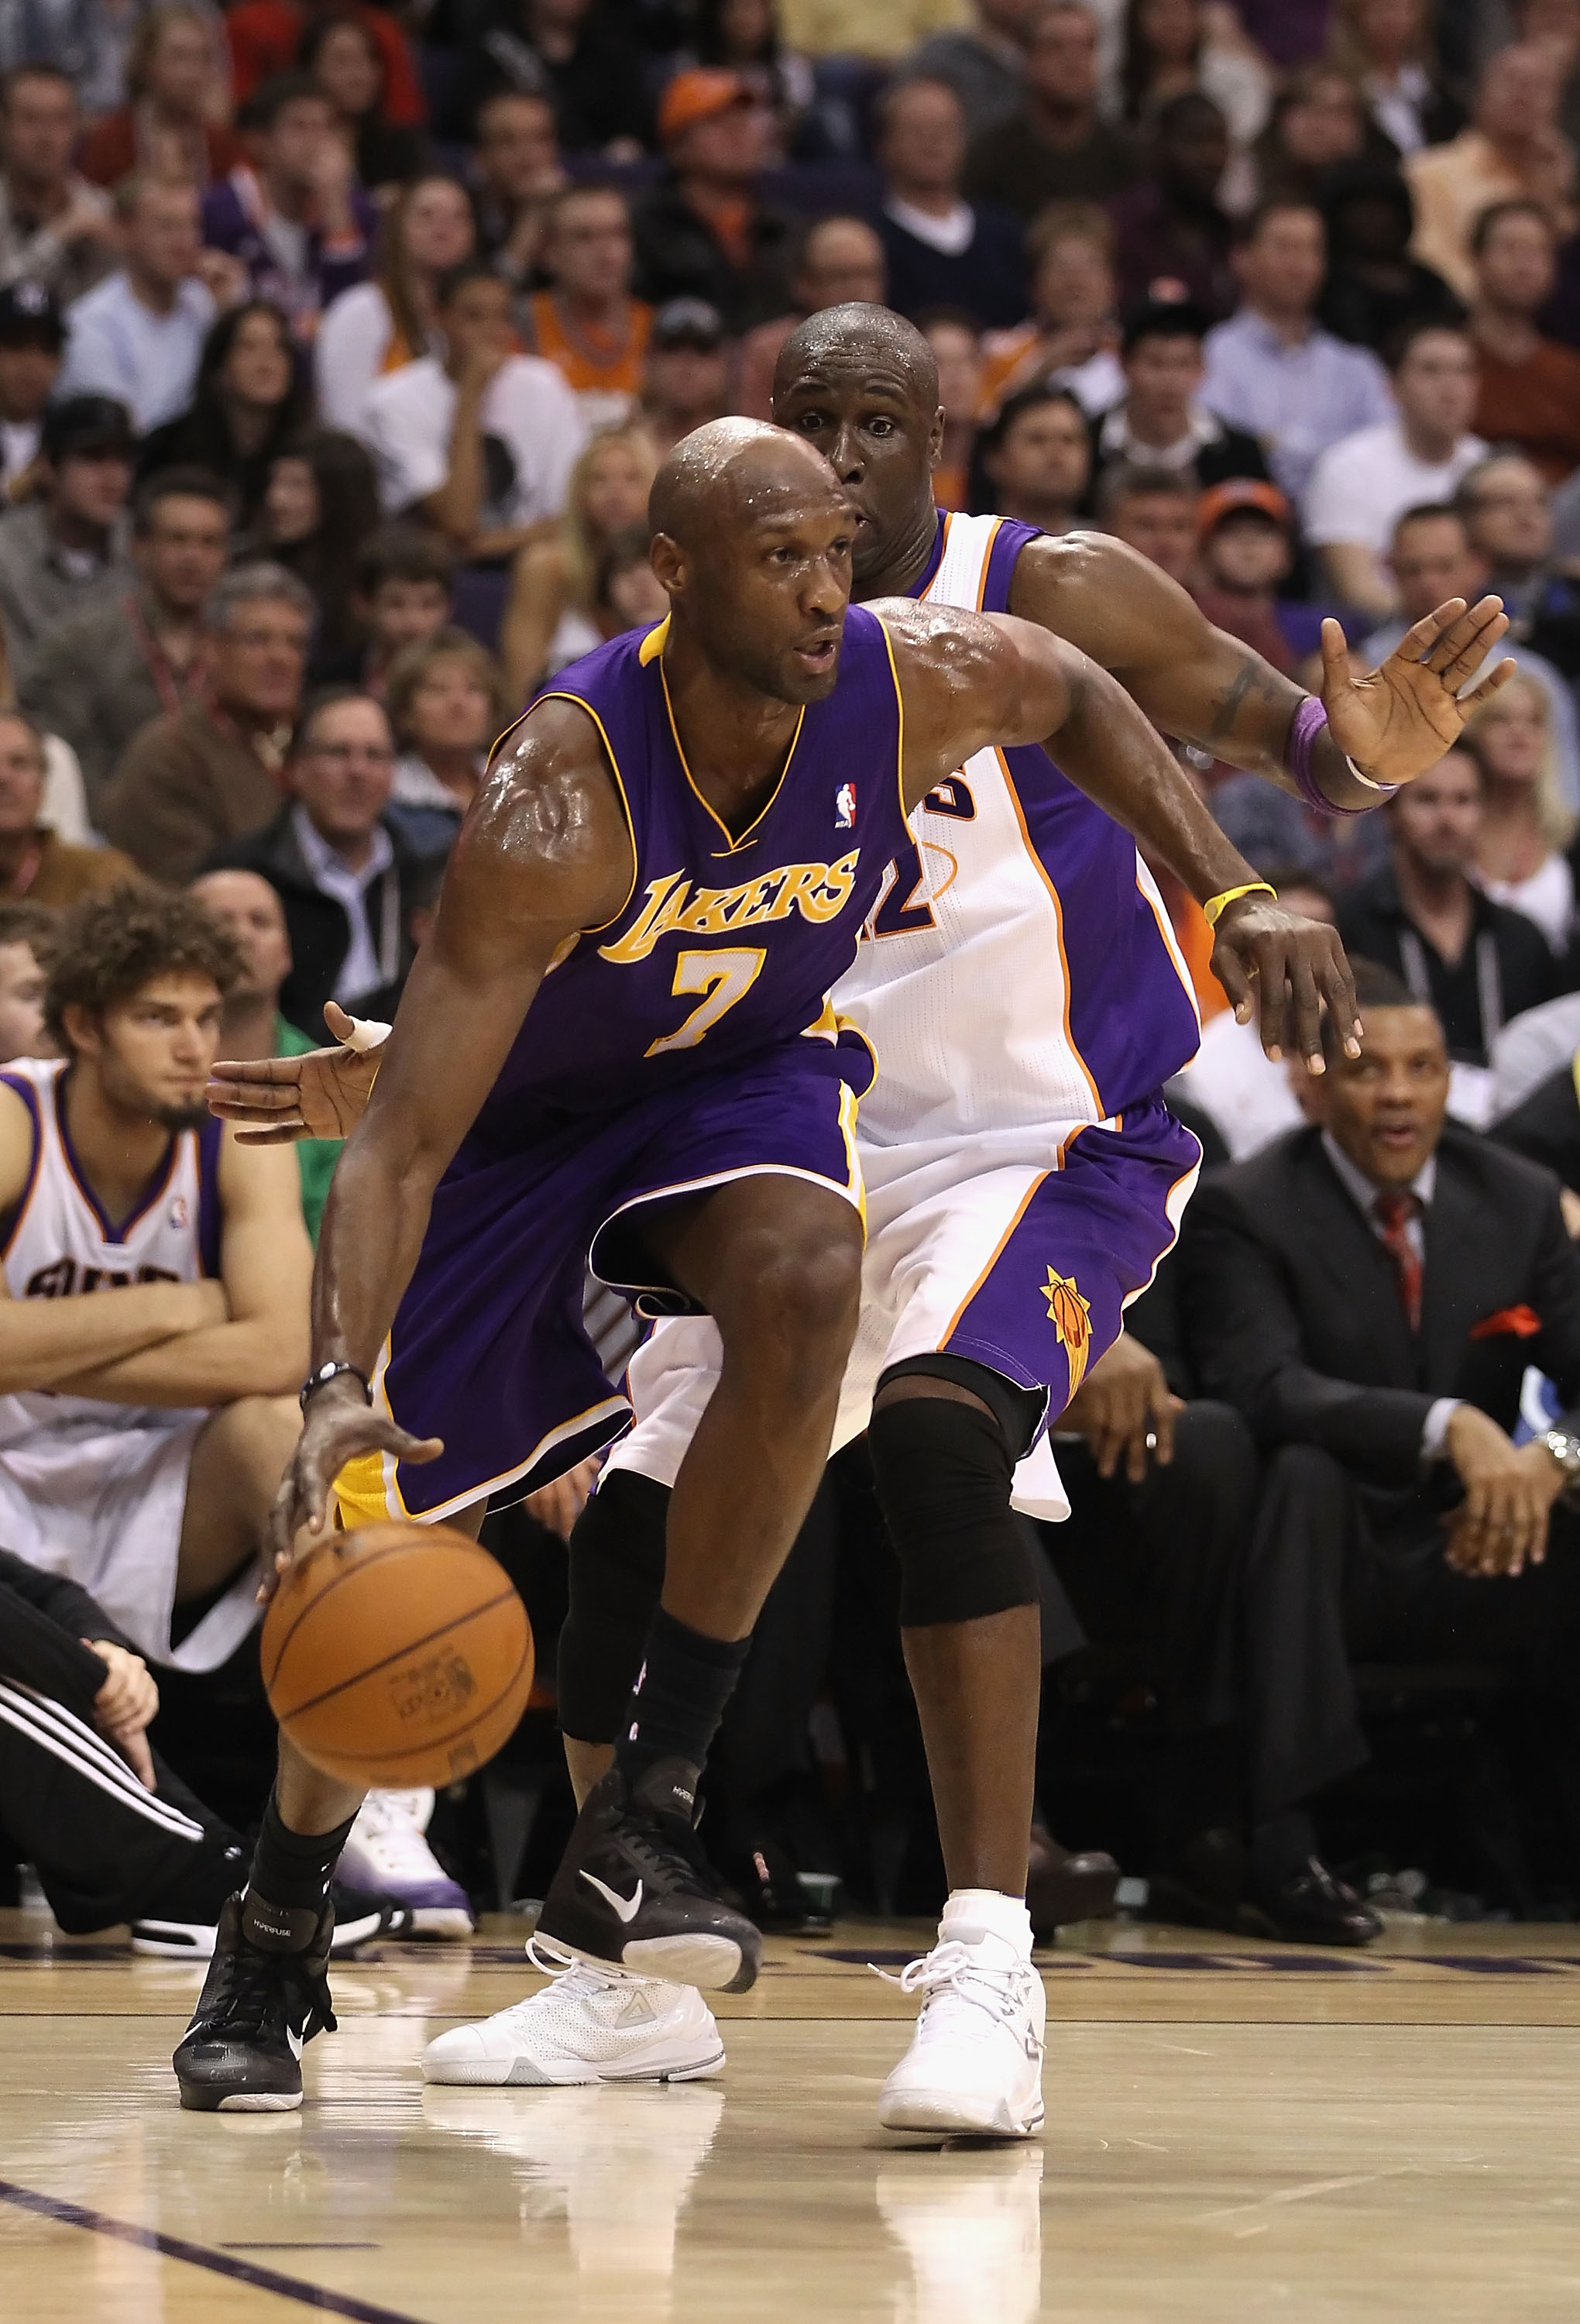 PHOENIX, AZ - JANUARY 05:  Lamar Odom #7 of the Los Angeles Lakers handles the ball during the NBA game against the Phoenix Suns at US Airways Center on December 23, 2011 in Phoenix, Arizona. The Lakers defeated the Suns 99-95.  NOTE TO USER: User express